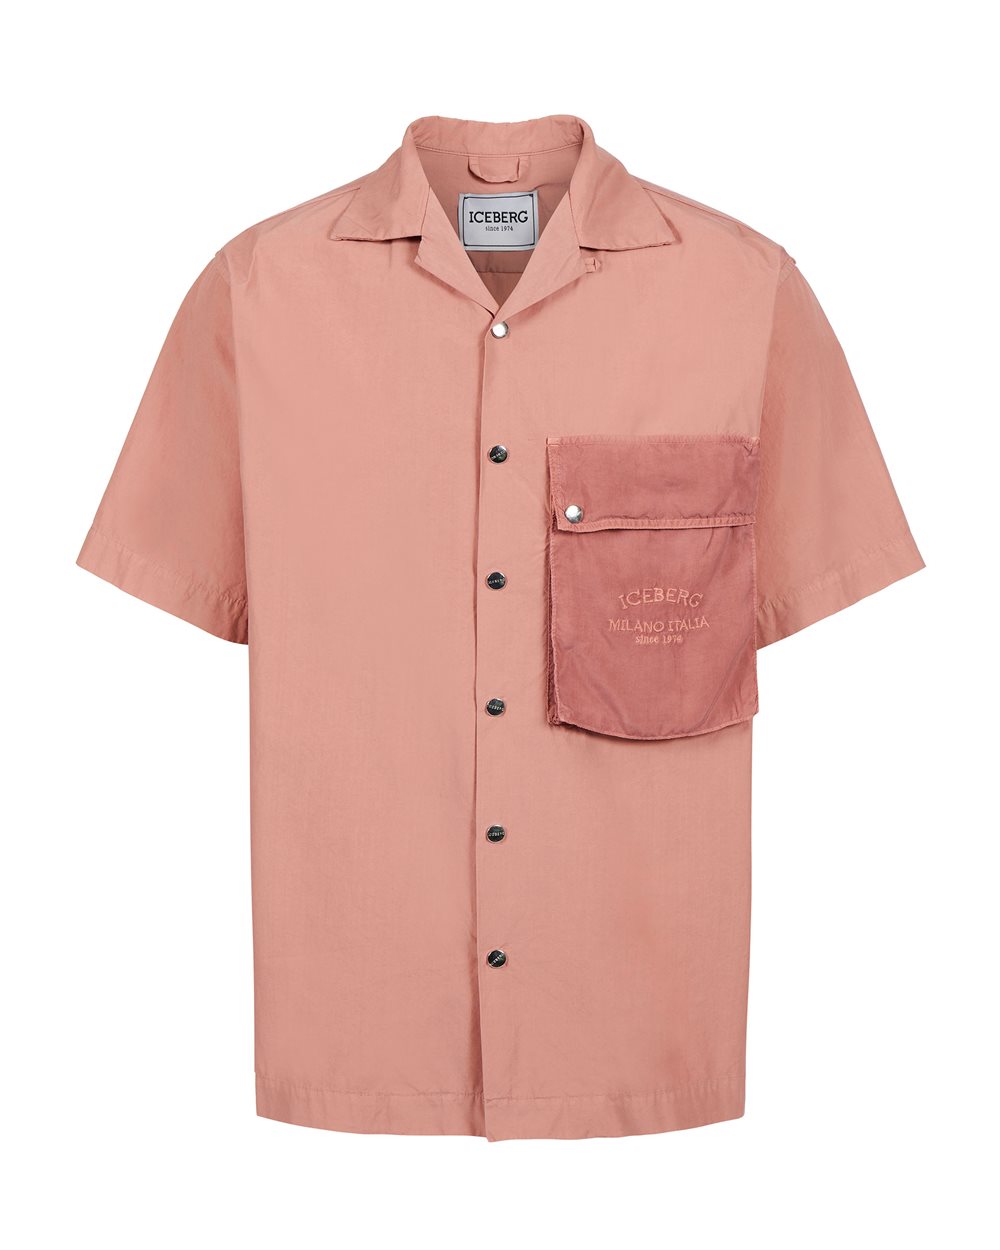 Shirt with institutional logo - shirts | Iceberg - Official Website